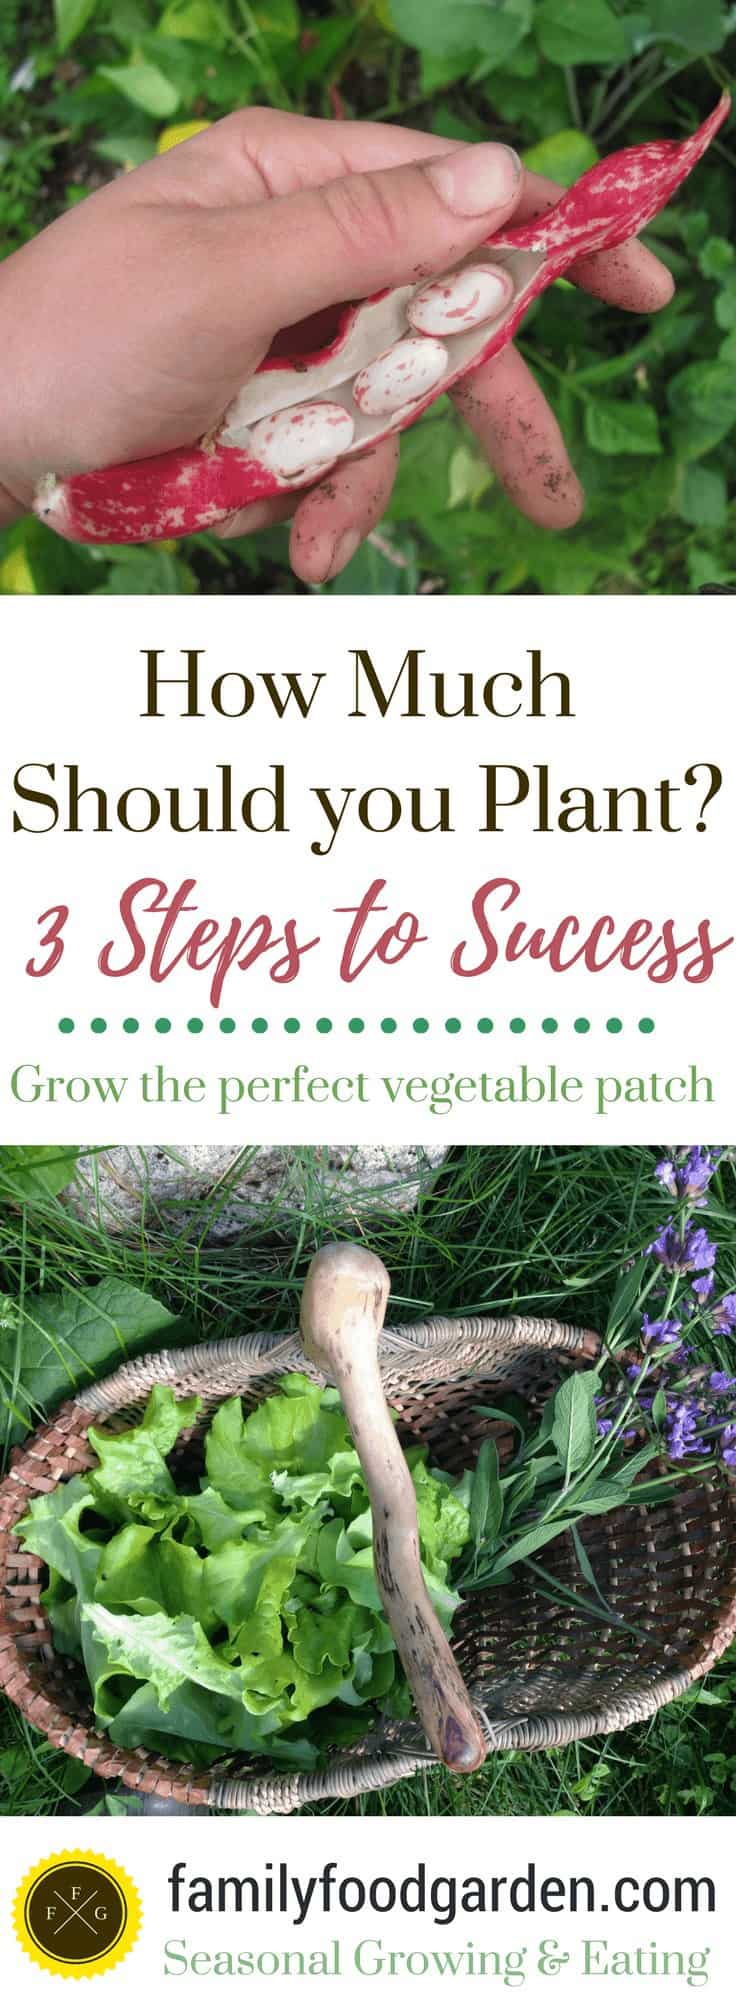 How Much Should You Plant? 3 Steps To Success